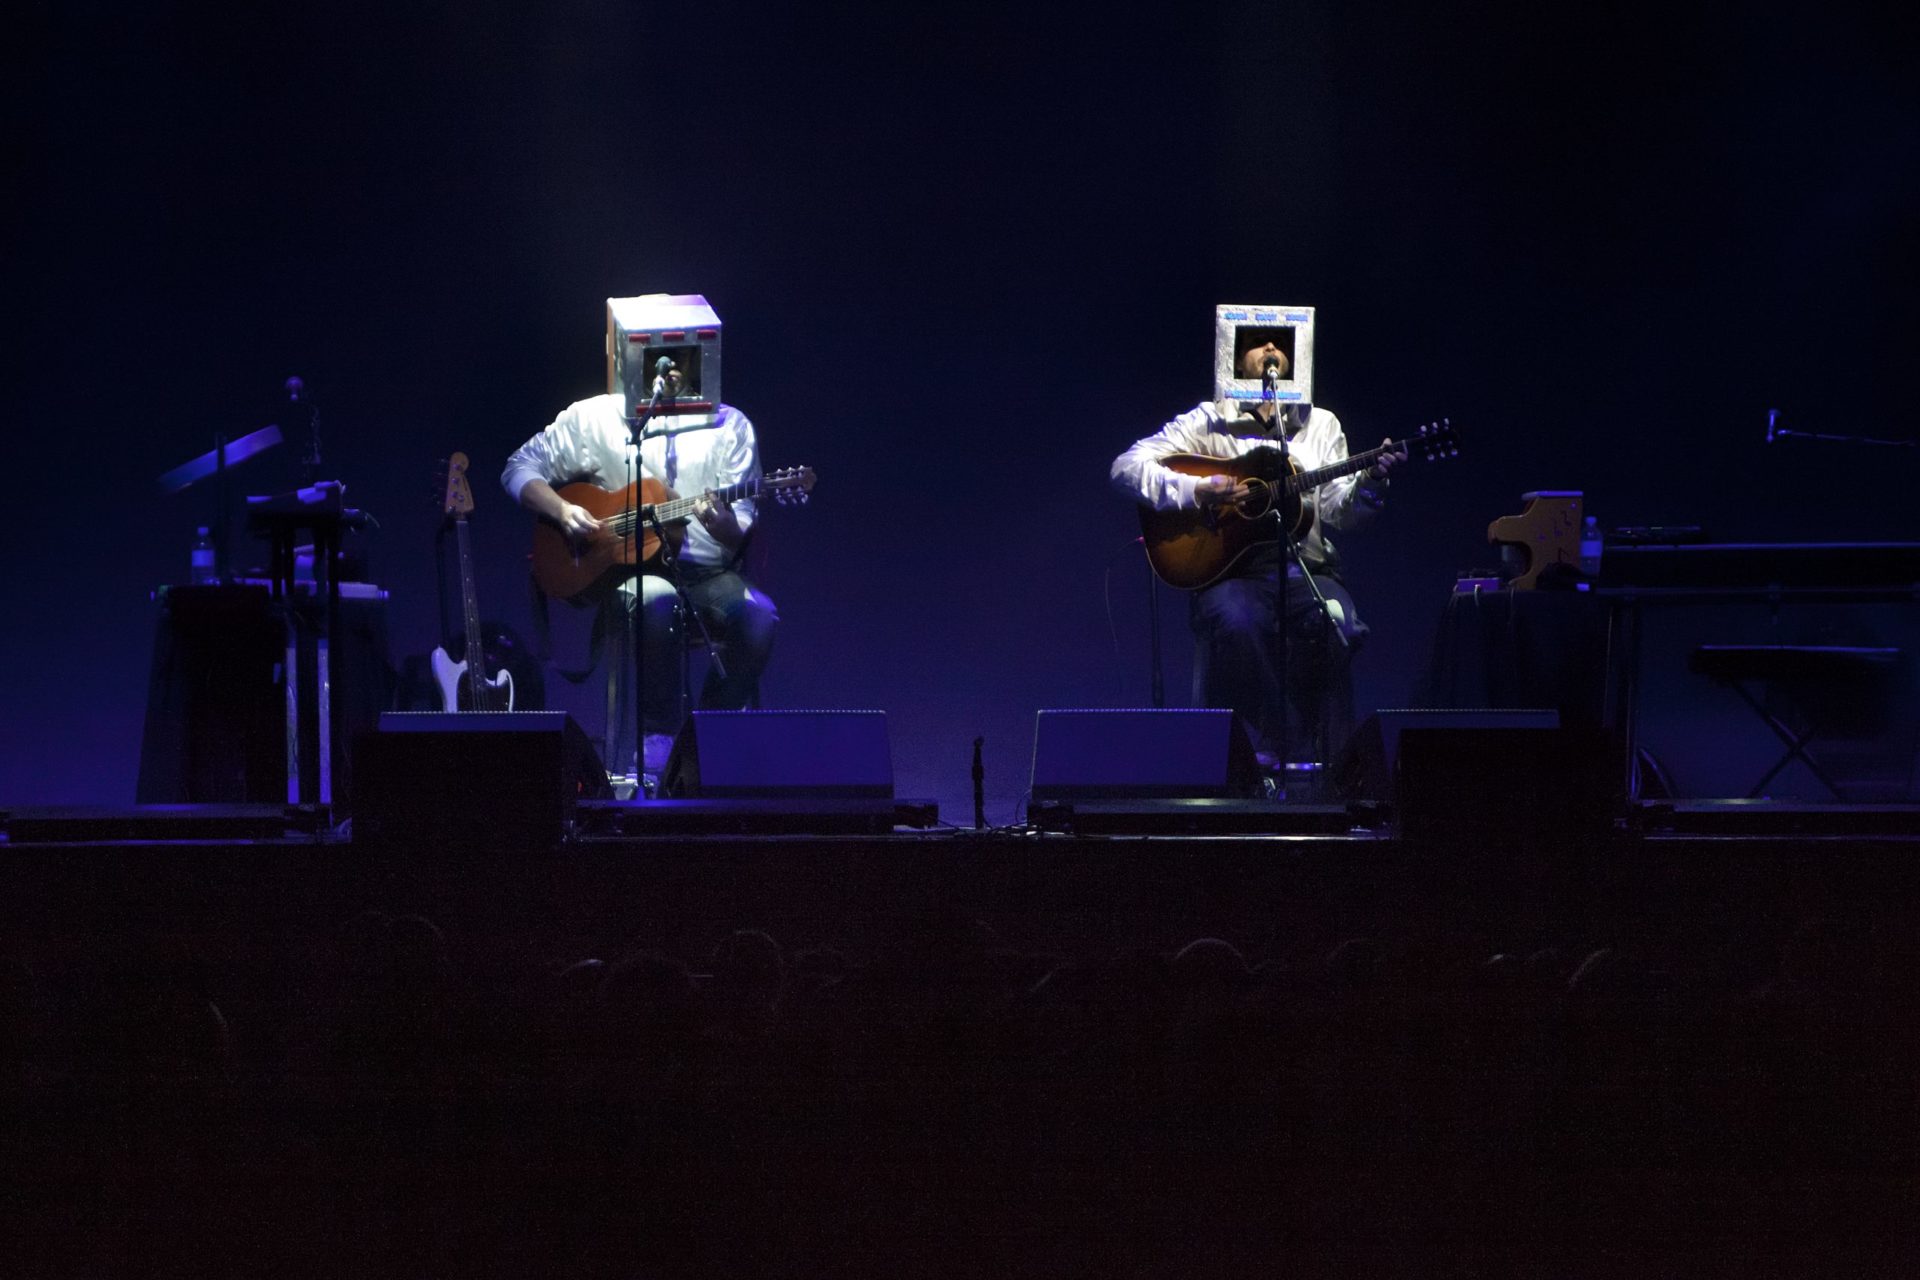 Flight Of The Conchords @ Entertainment Centre, July ’12